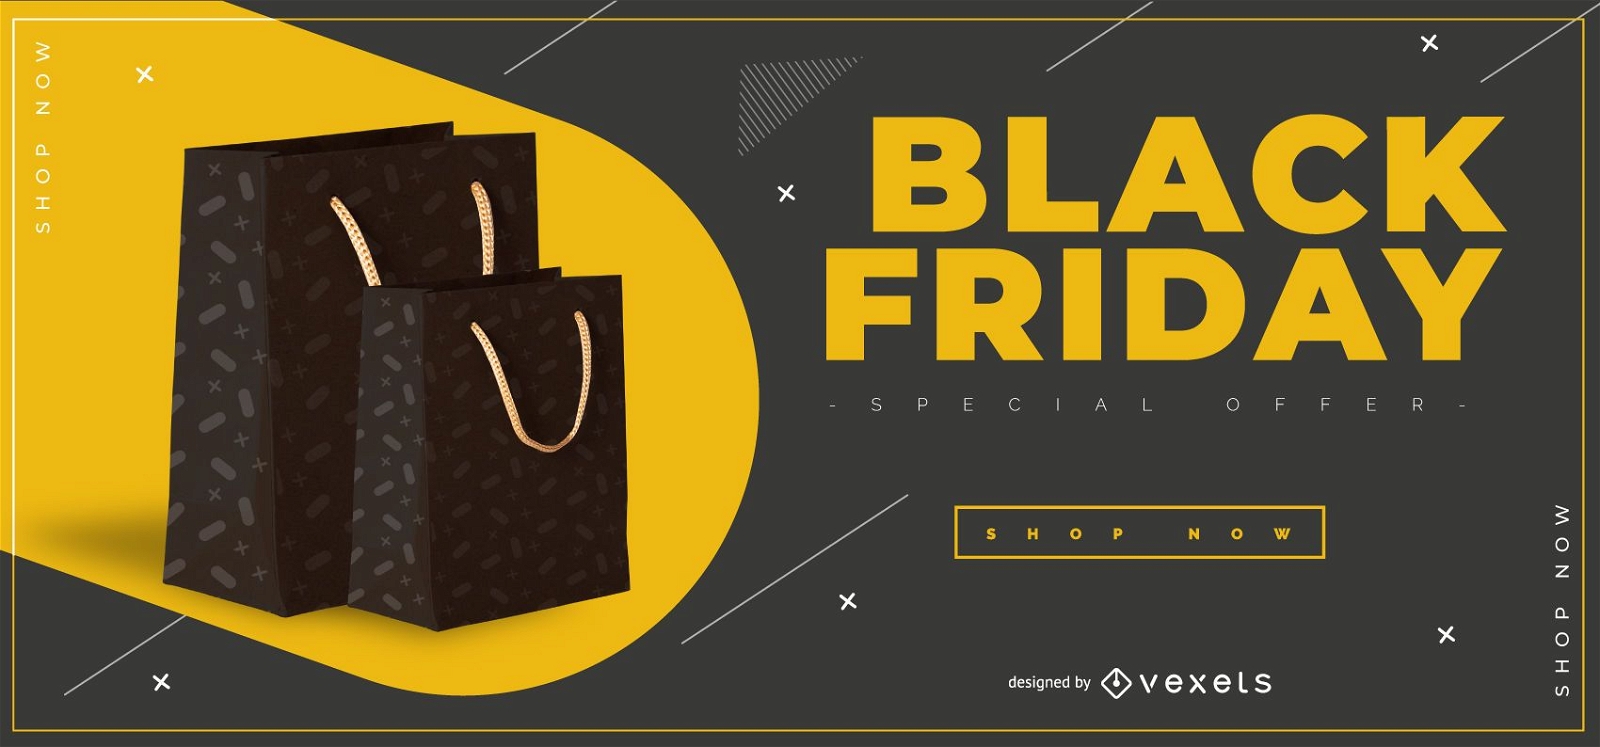 Black friday bags banner template